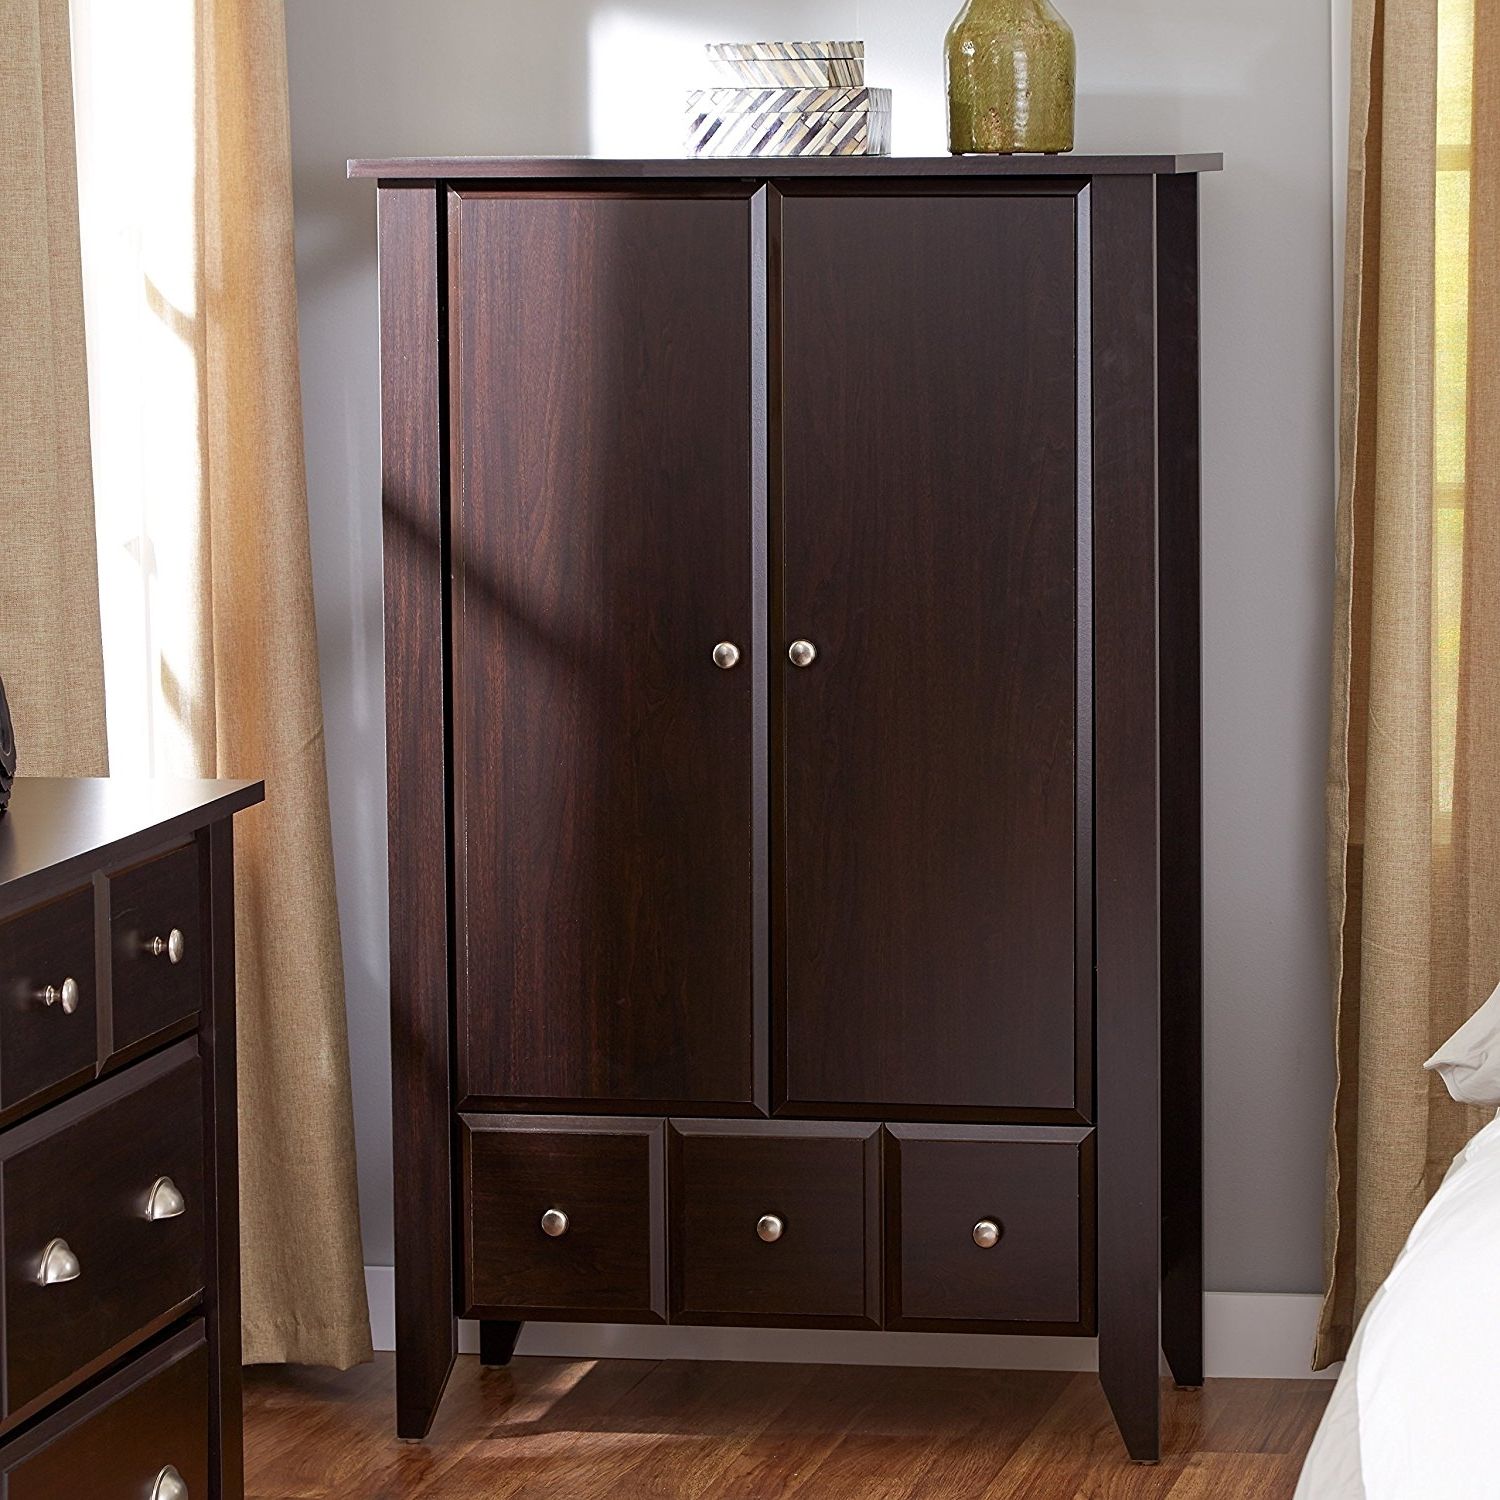 Cheap Wood Wardrobes With Regard To Latest Amazon: Wardrobe Closet Armoire – Modern Contemporary Dresser (View 6 of 15)